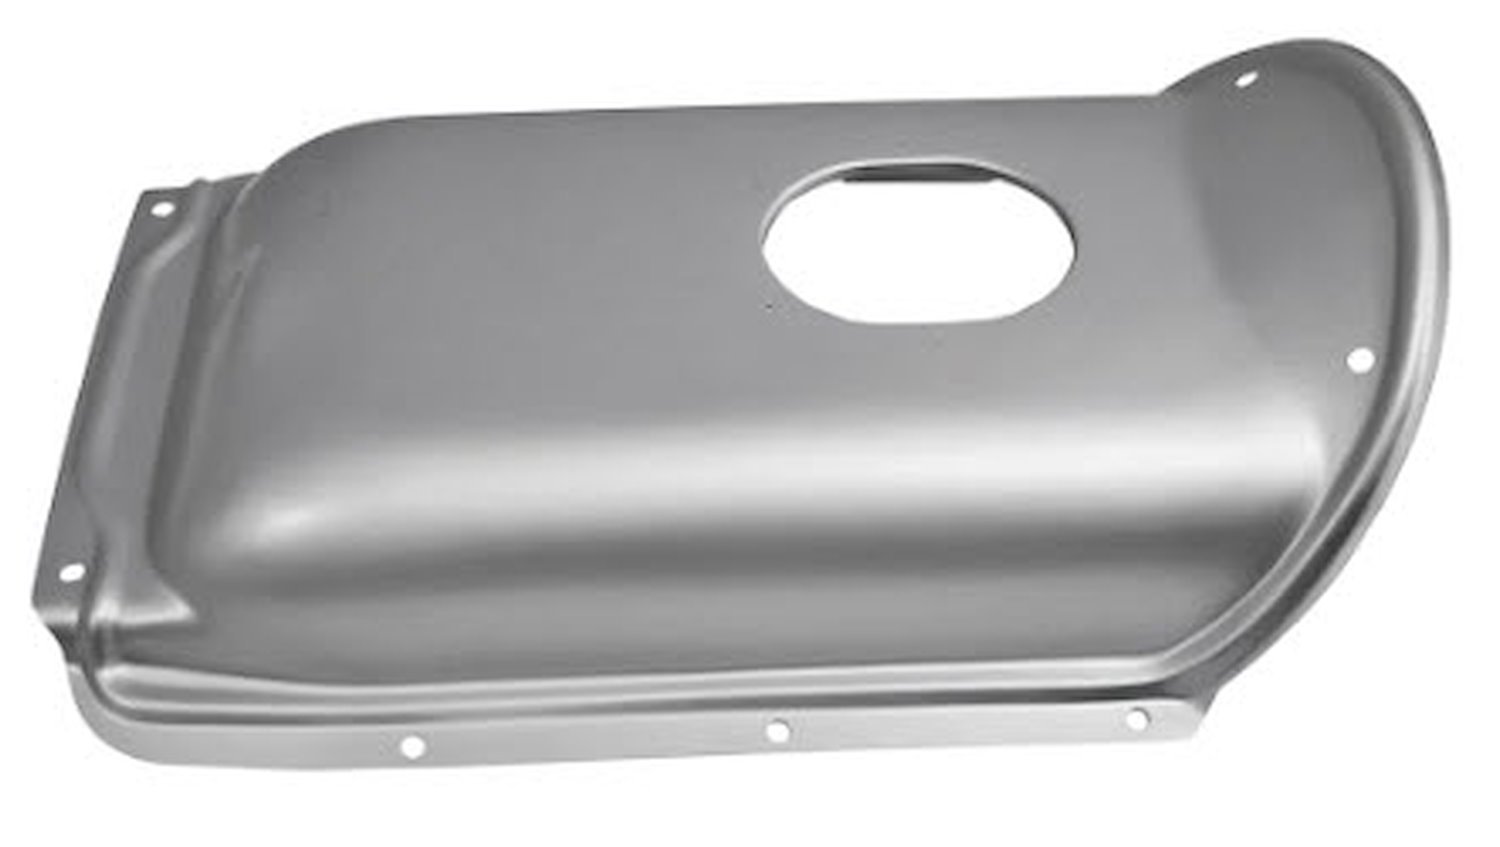 FP07-671H High-Hump Transmission Cover for Chevy, GMC Trucks w/Manual Transmission